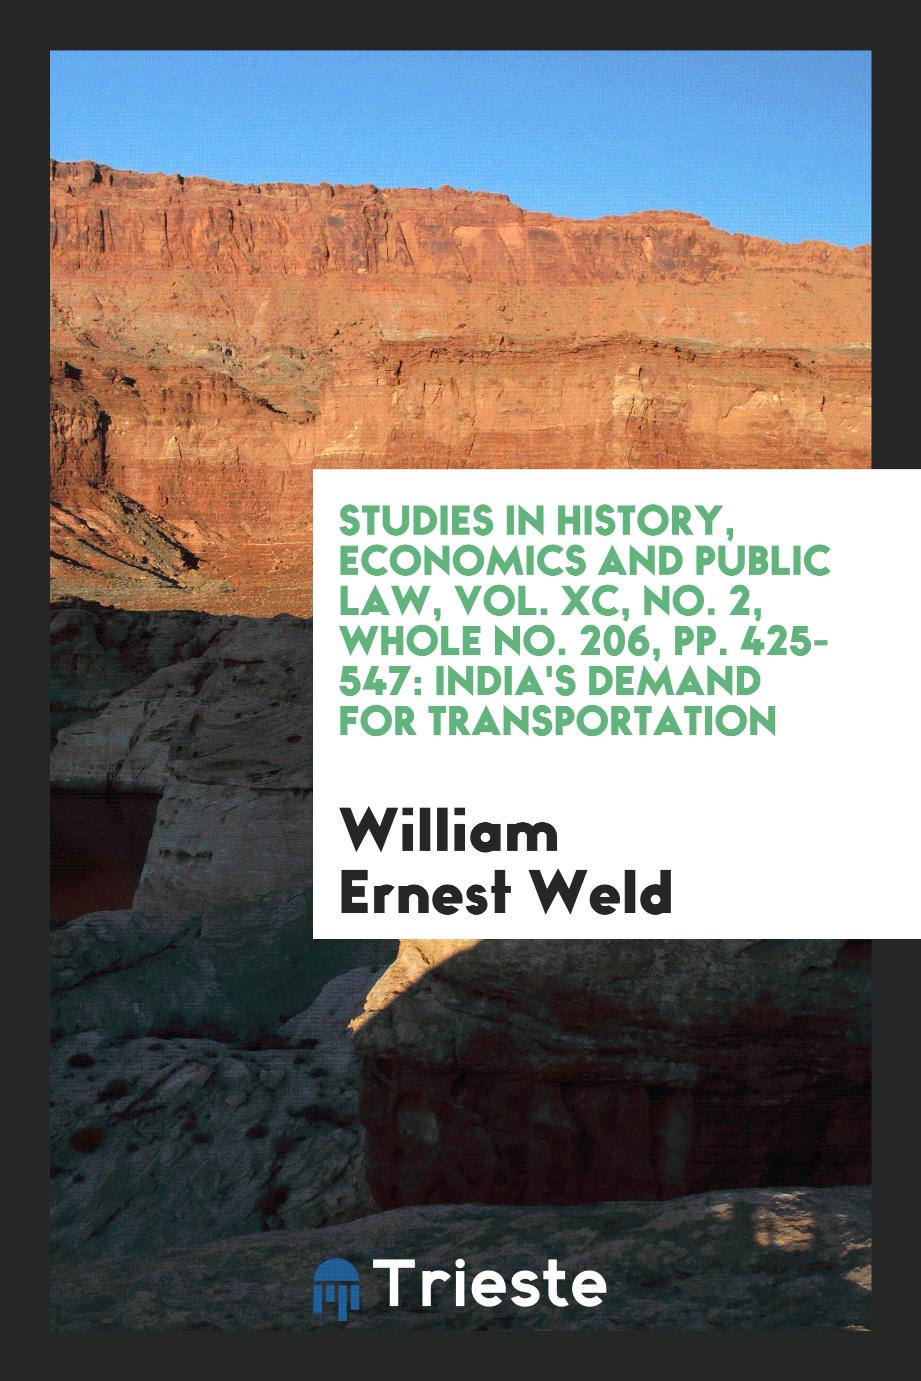 Studies in History, Economics and Public Law, Vol. XC, No. 2, Whole No. 206, pp. 425-547: India's Demand for Transportation